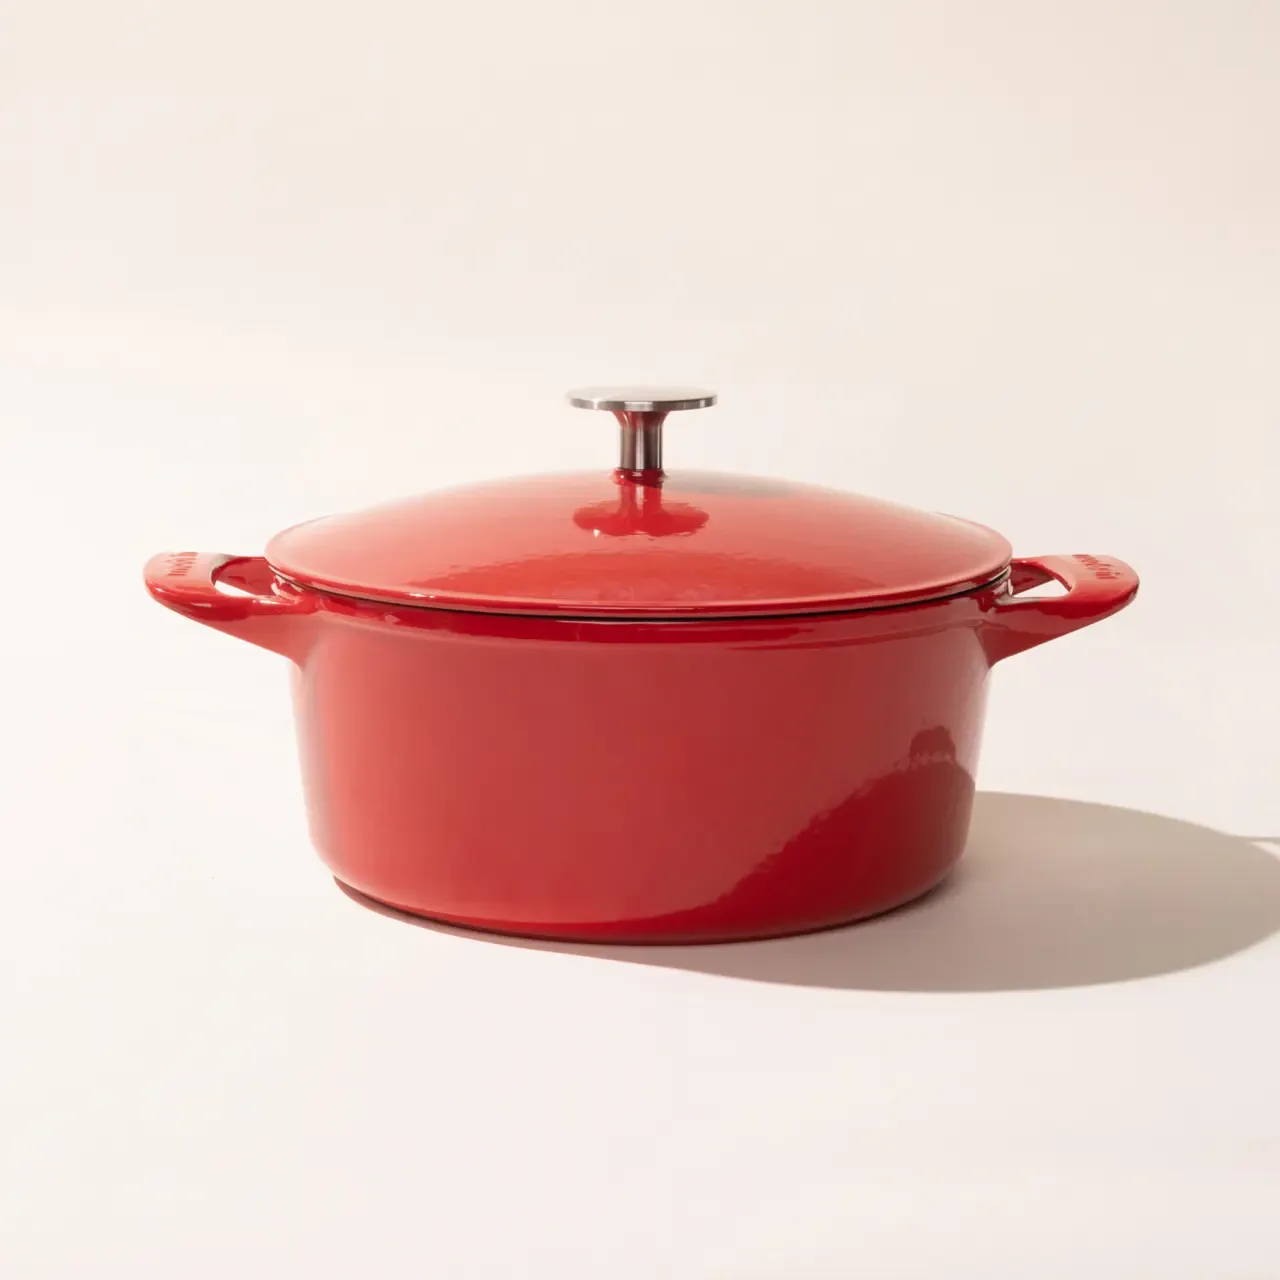 https://cdn.apartmenttherapy.info/image/upload/v1700169752/gen-workflow/product-database/made-in-dutch-oven-red.webp